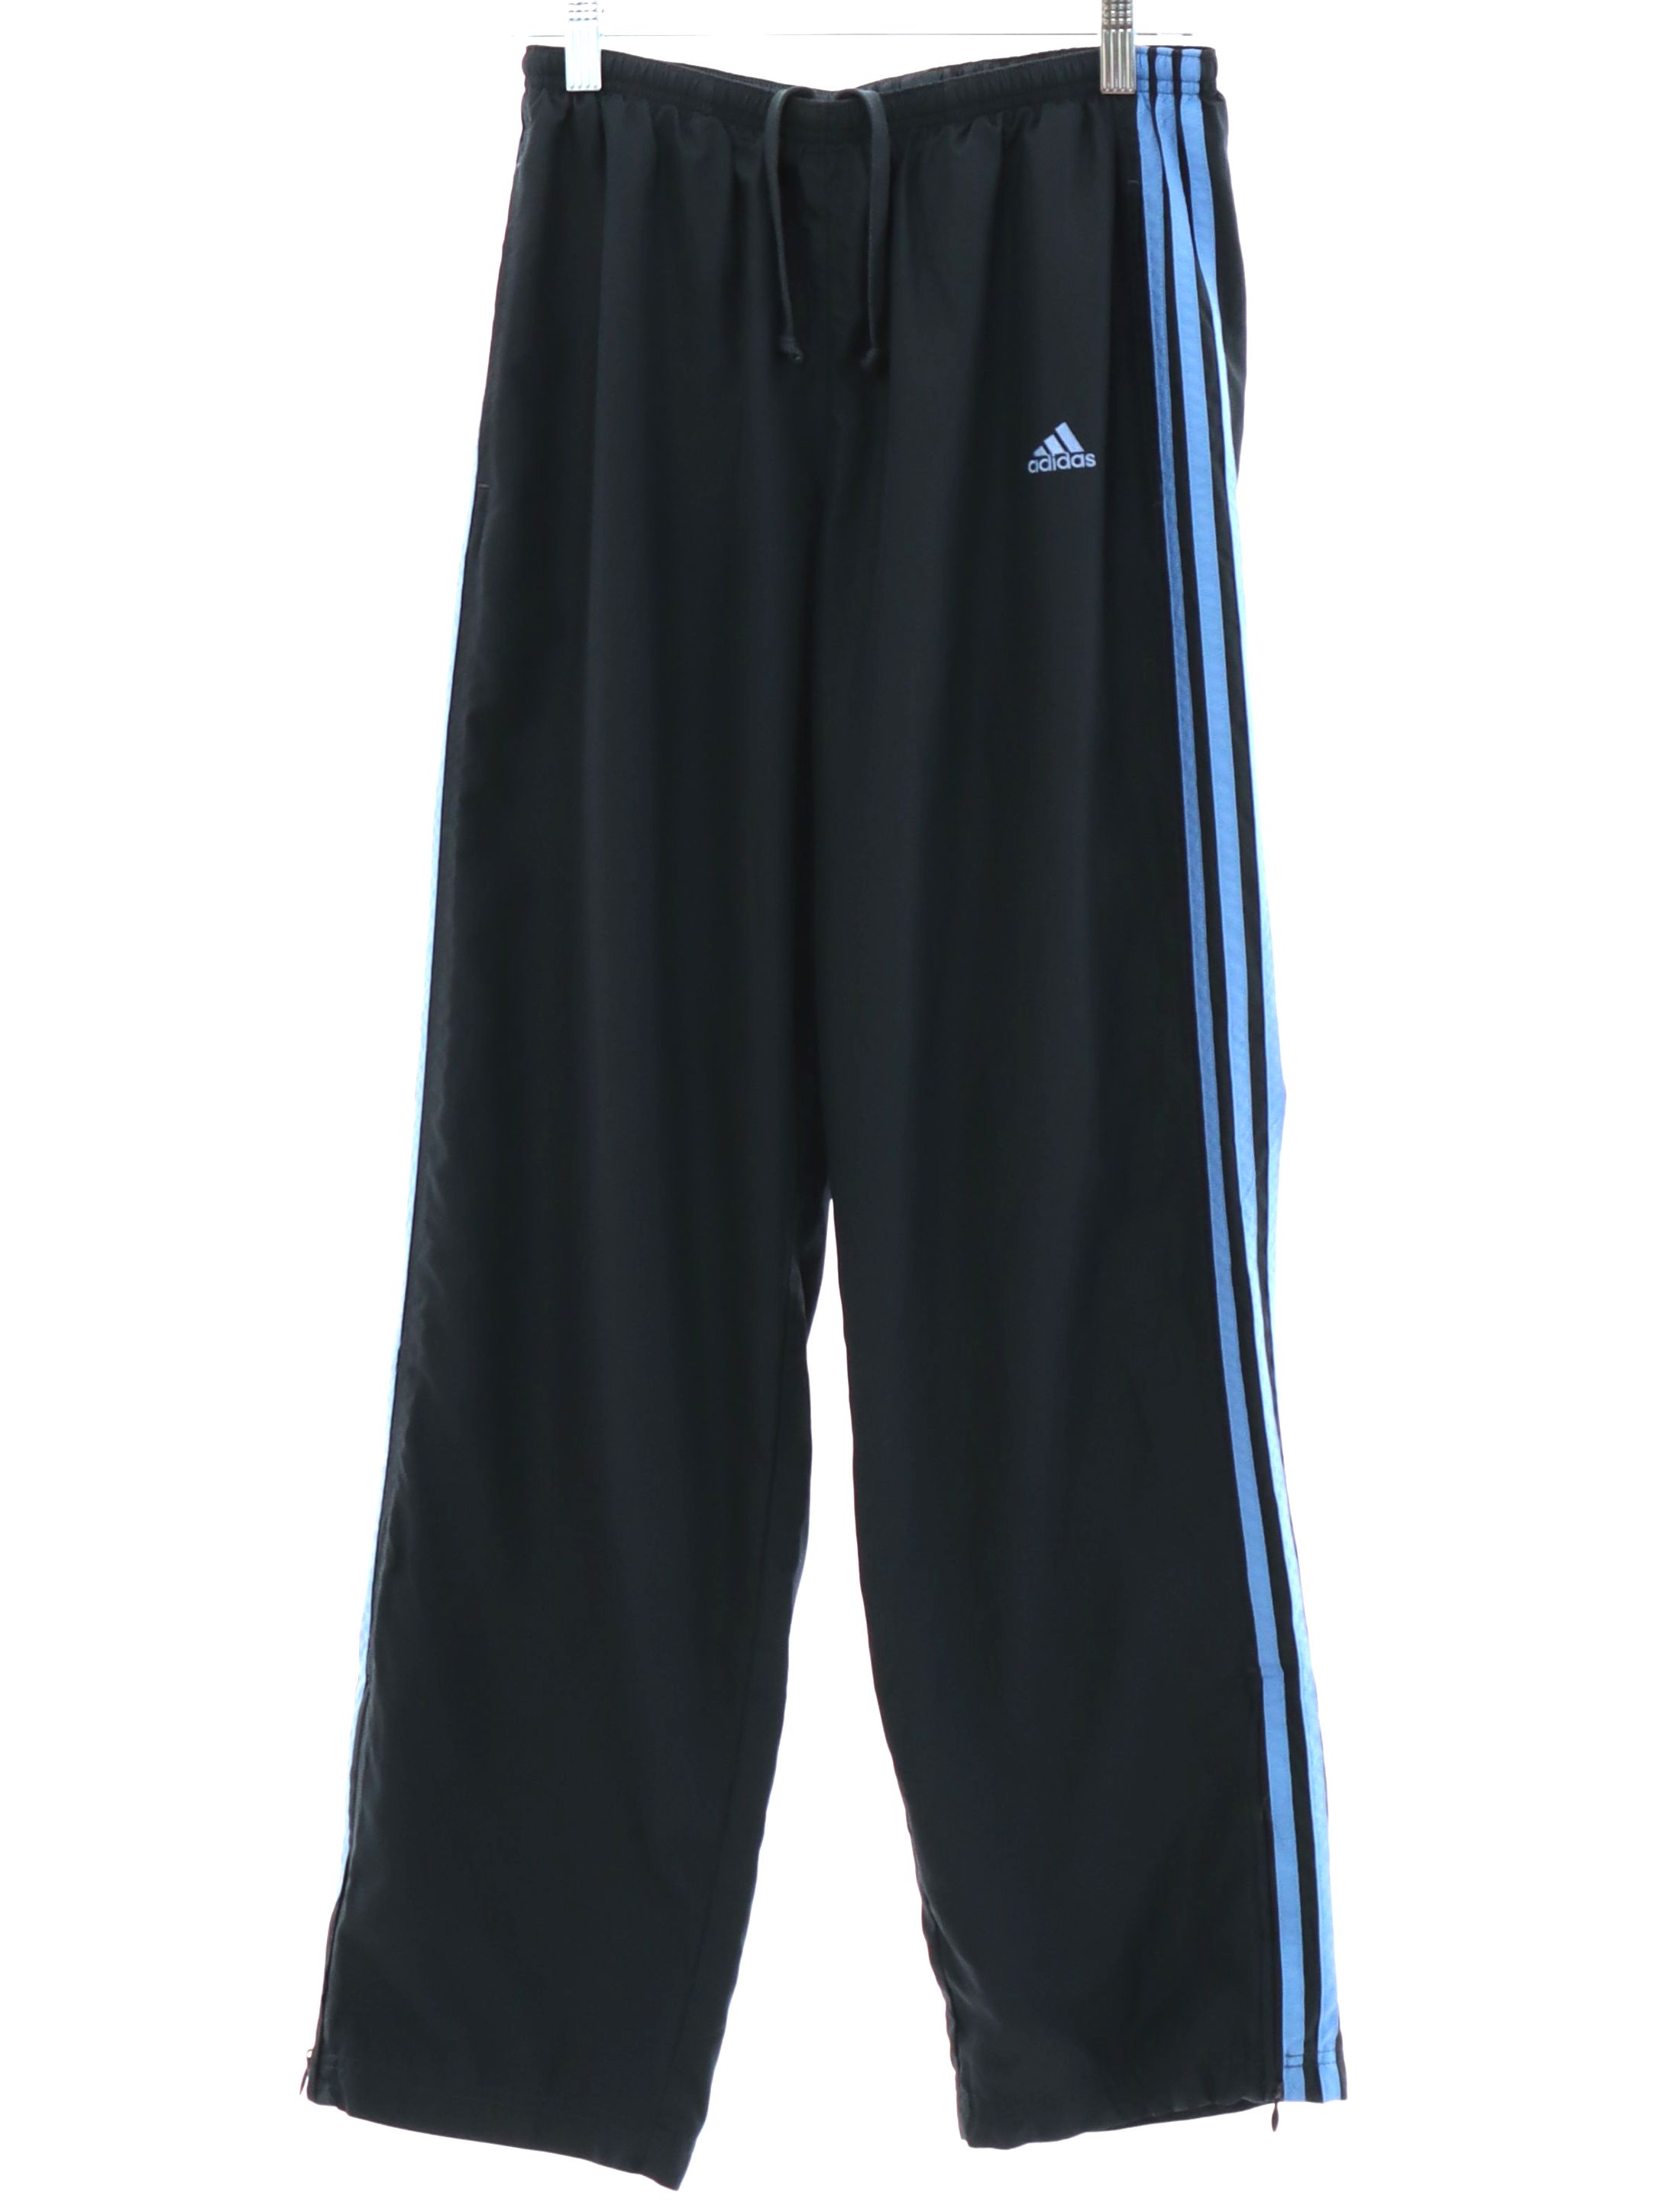 Adidas Black Climacool Track Pants - Size XS Soccer Ankle Zip Tapered